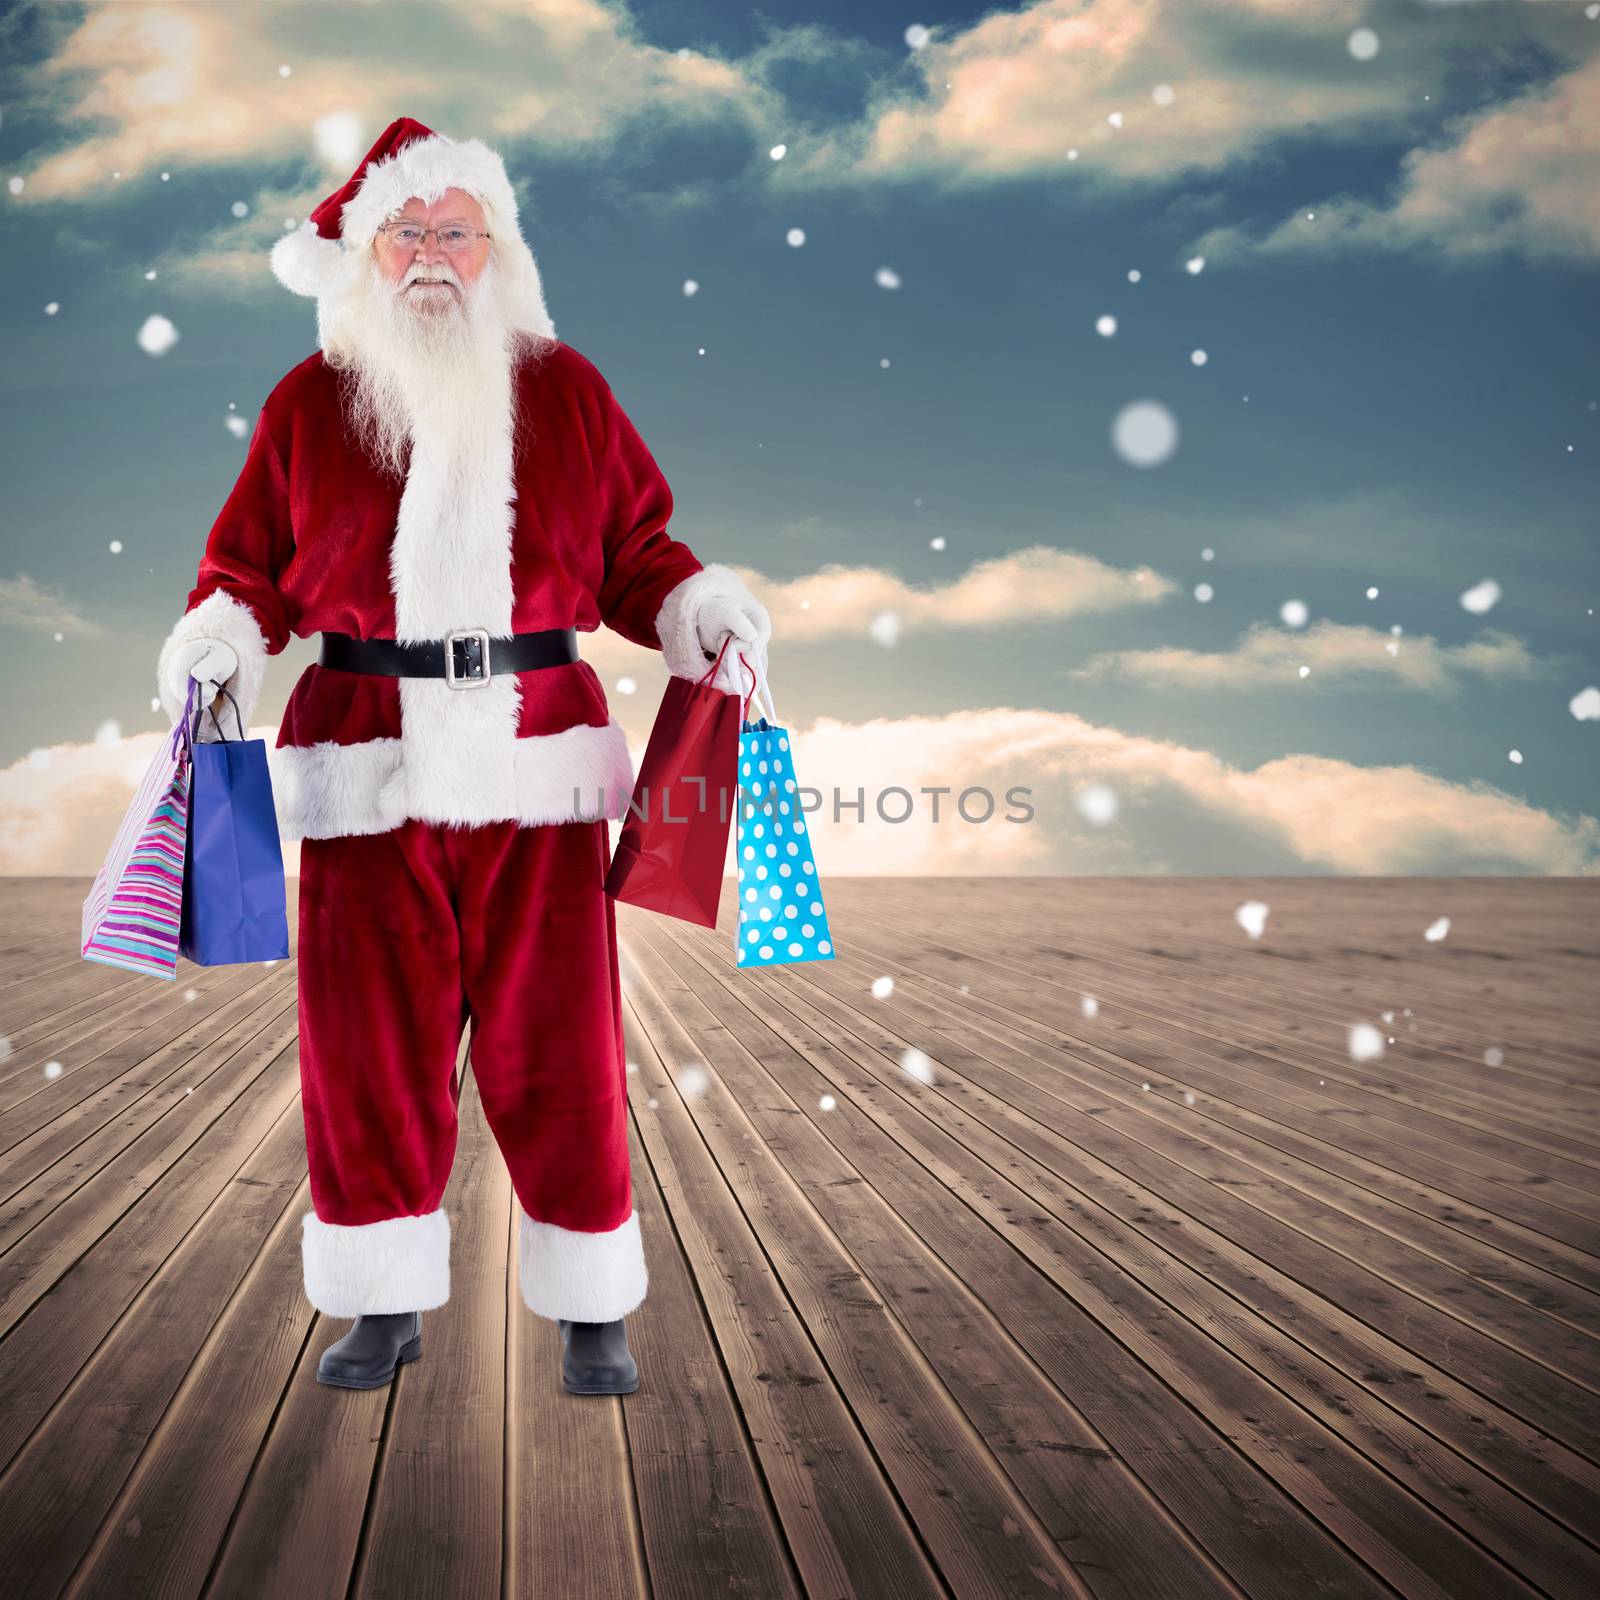 Santa carrying gifts against wooden planks leading to blue sky